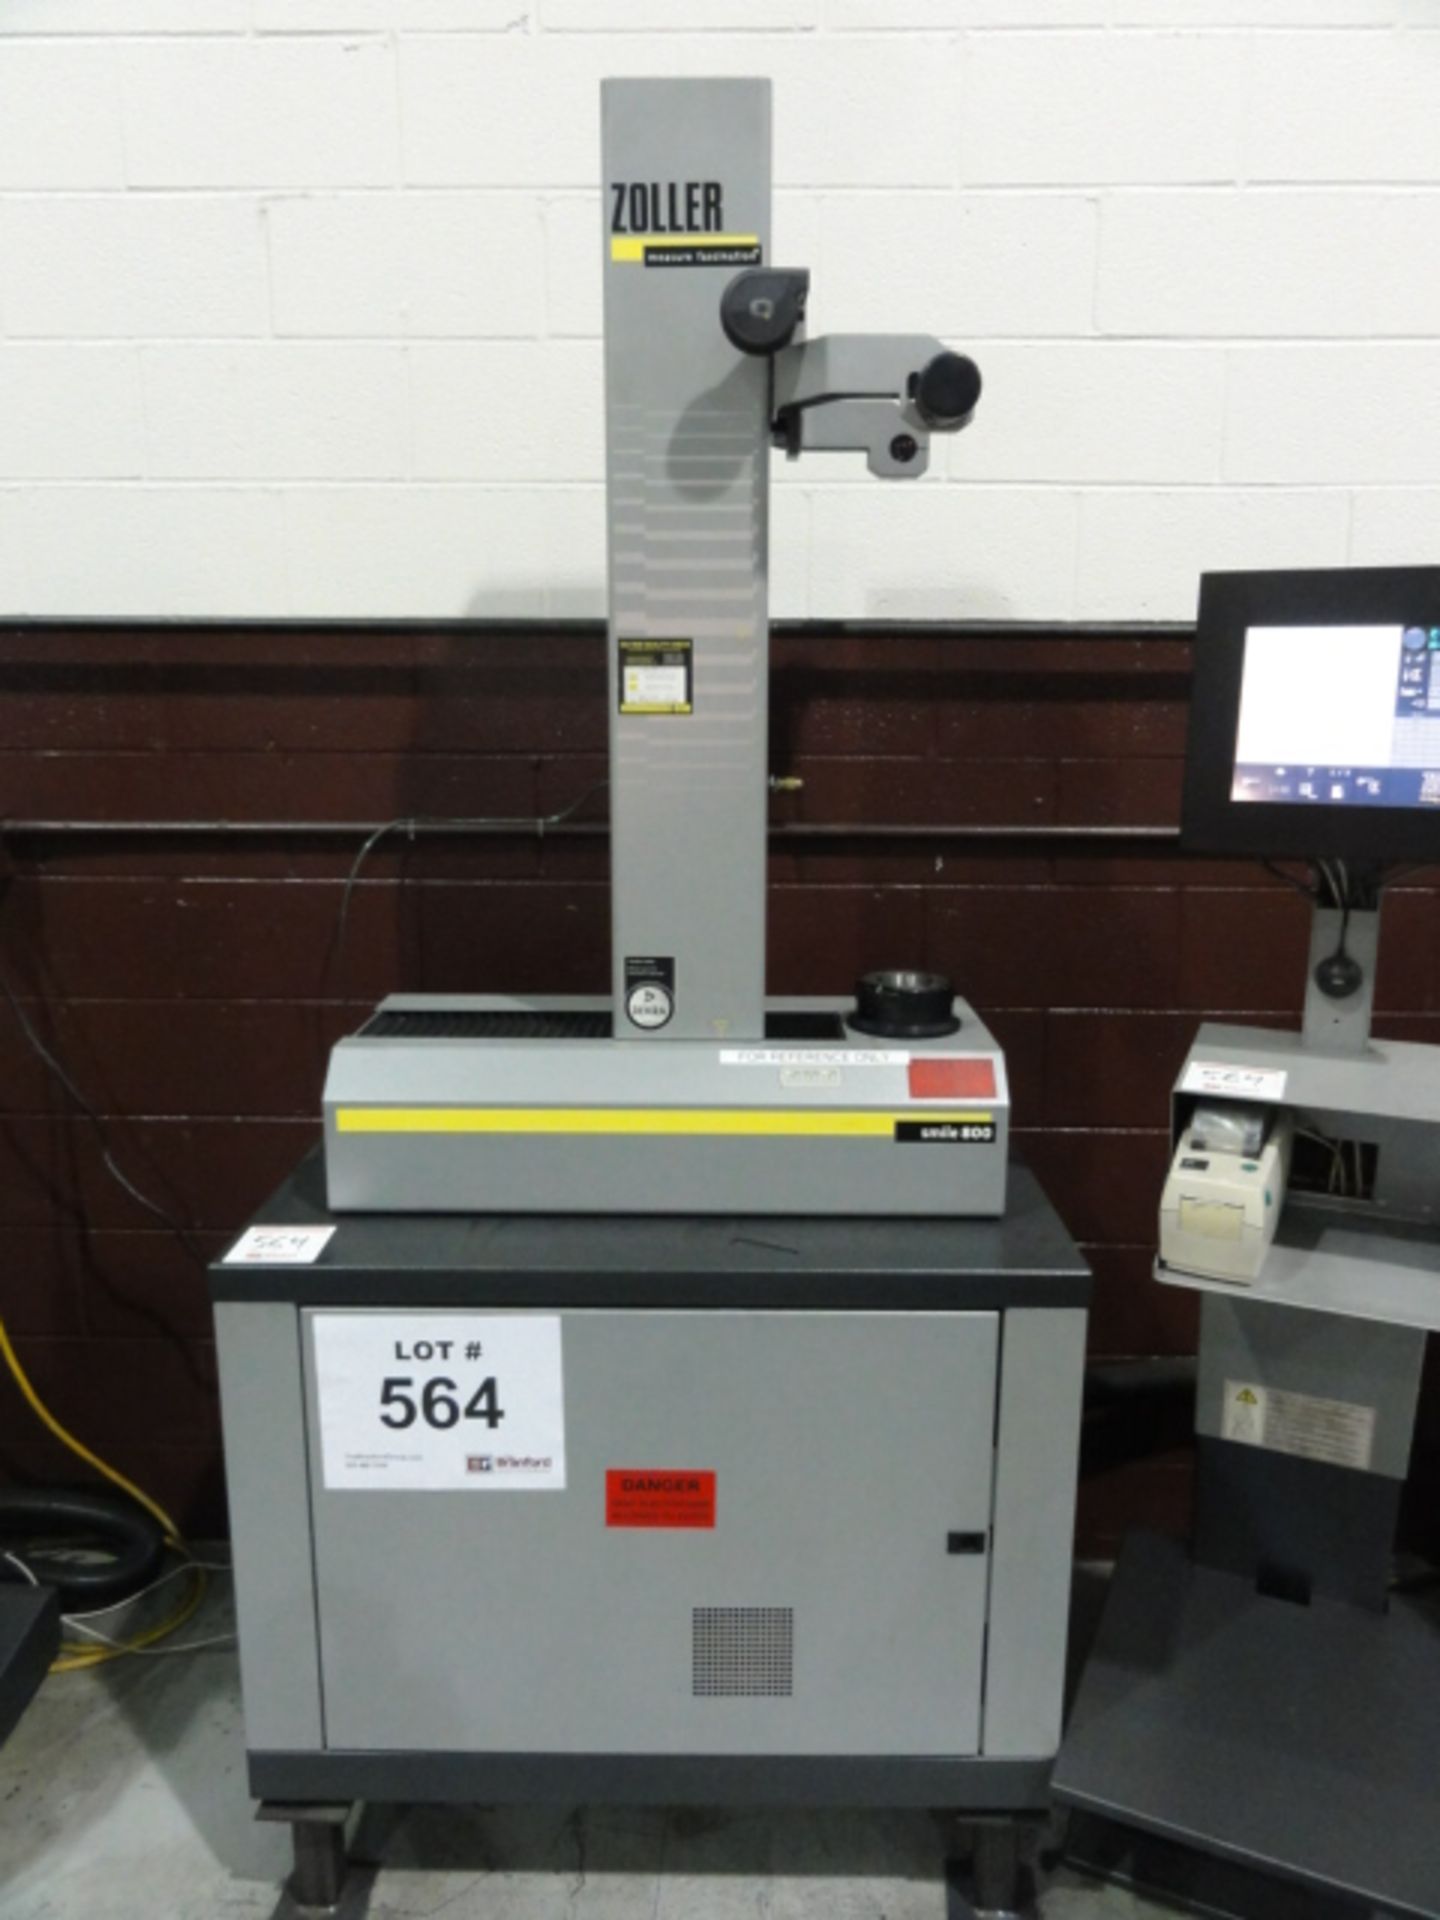 2011 Zoller Smile 800 Digital Tool Presetter w/ Tool Holding Fixture, Transmitted Light, Image - Image 2 of 6